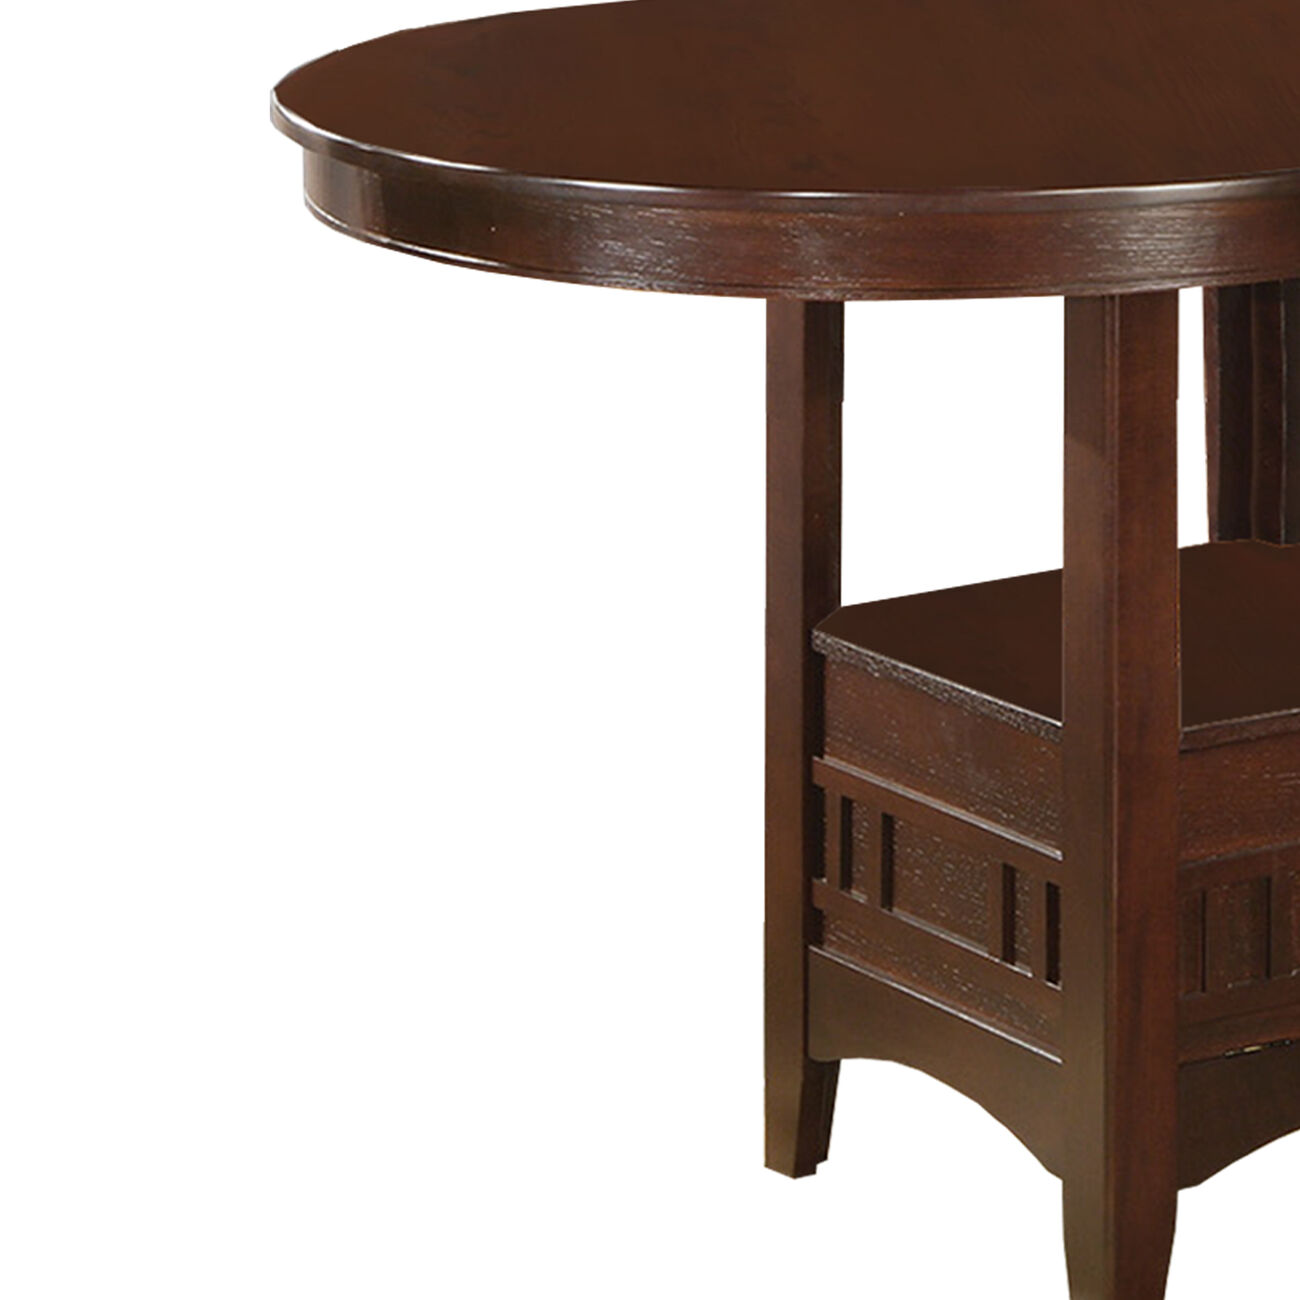 Counter Height Dining Table, Warm Brown